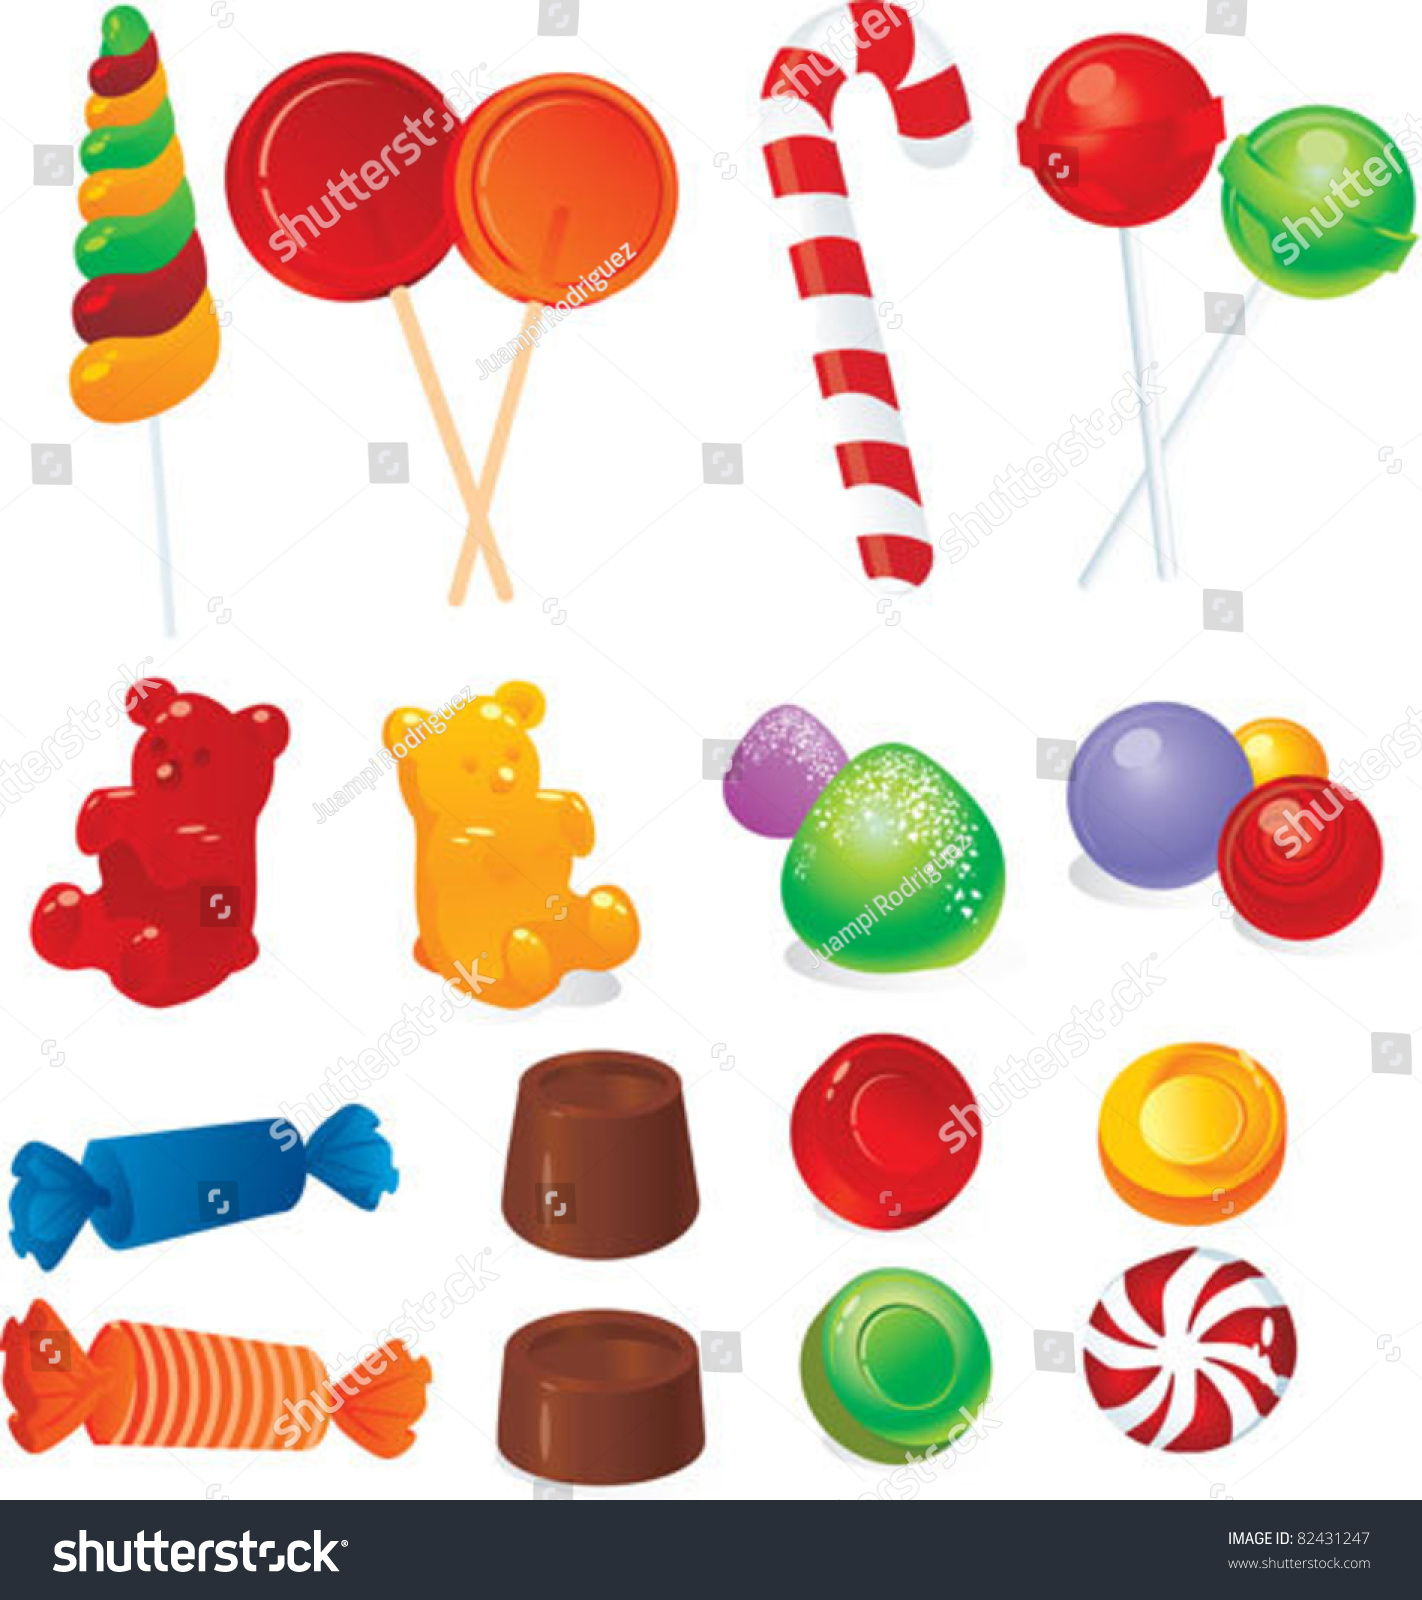 Candy Sweets Stock Vector Illustration 82431247 : Shutterstock